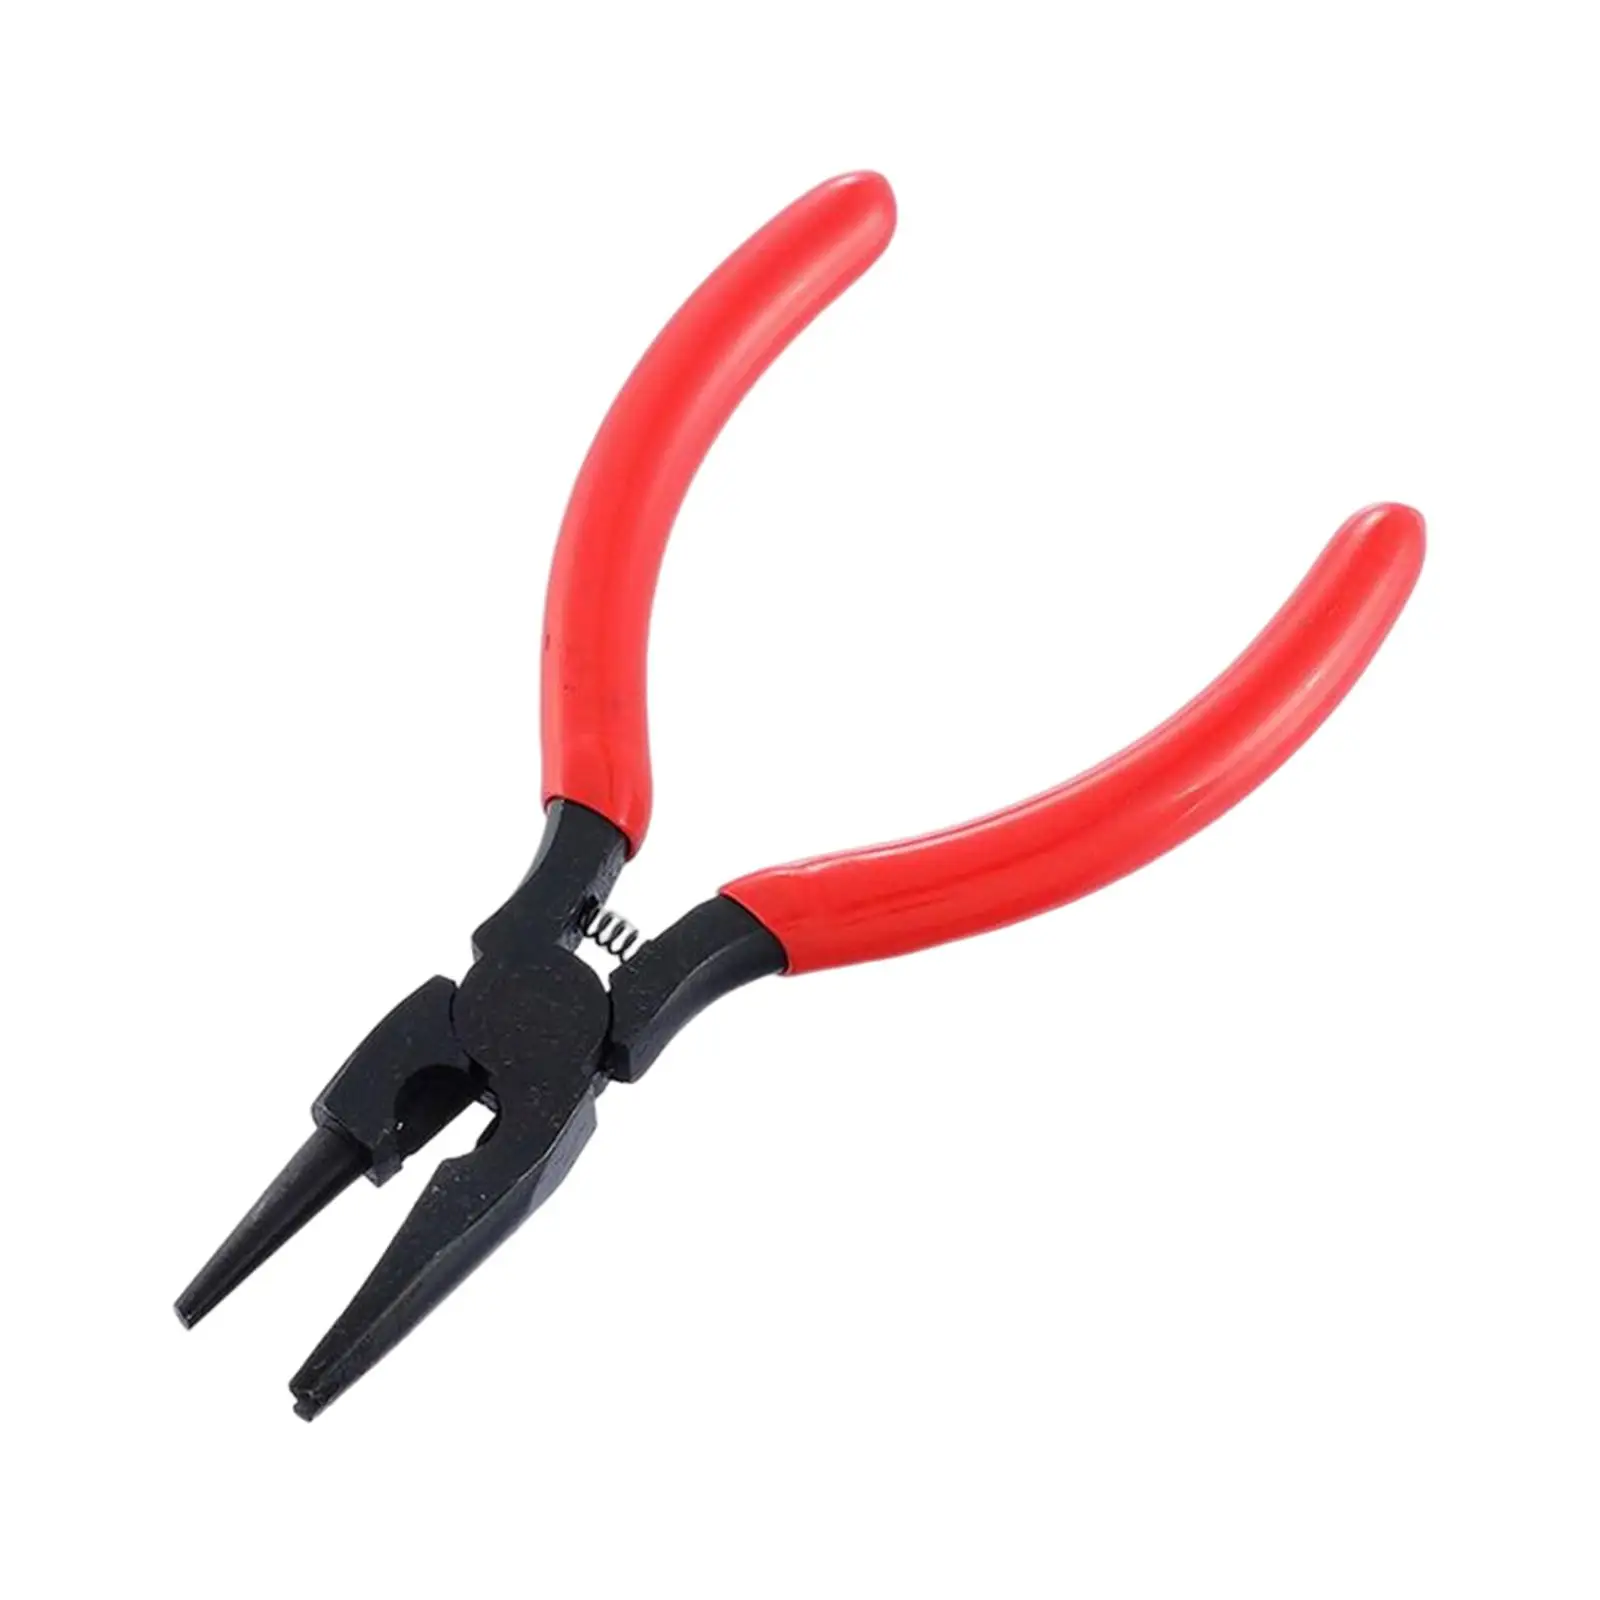 Cutting Wire Pliers Jewelry Making Pliers Multi Functional DIY Sharp Nose Pliers for Beading DIY Tool Accessories Wire Wrapping